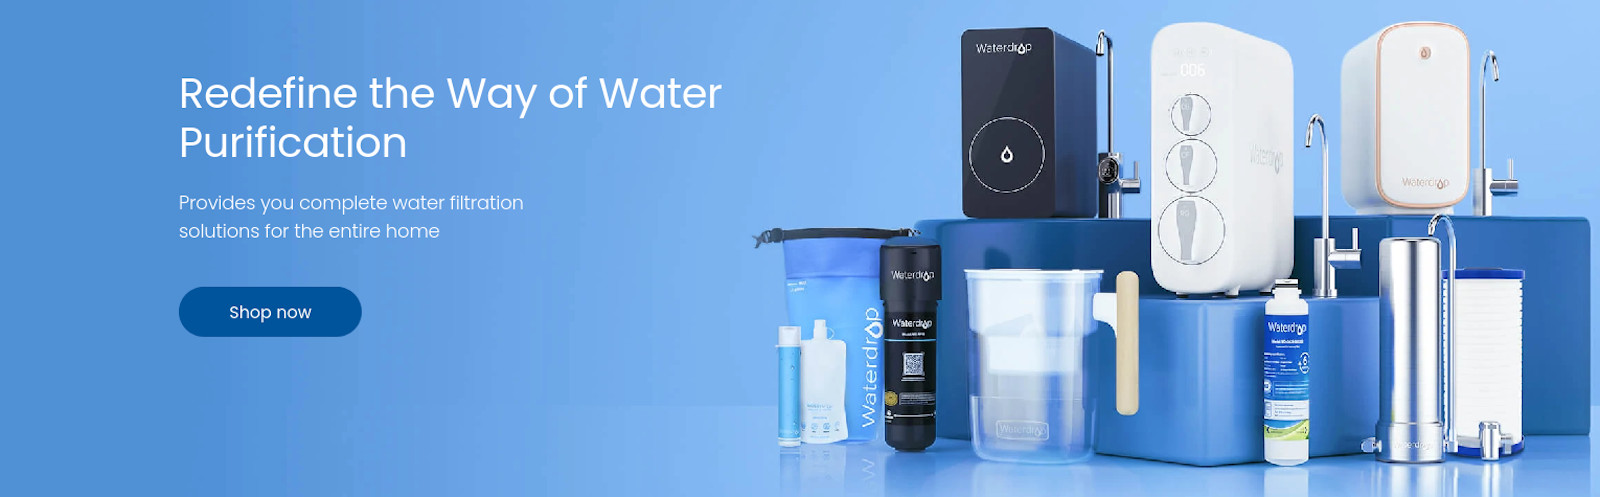 At A Reduced Price water purification products